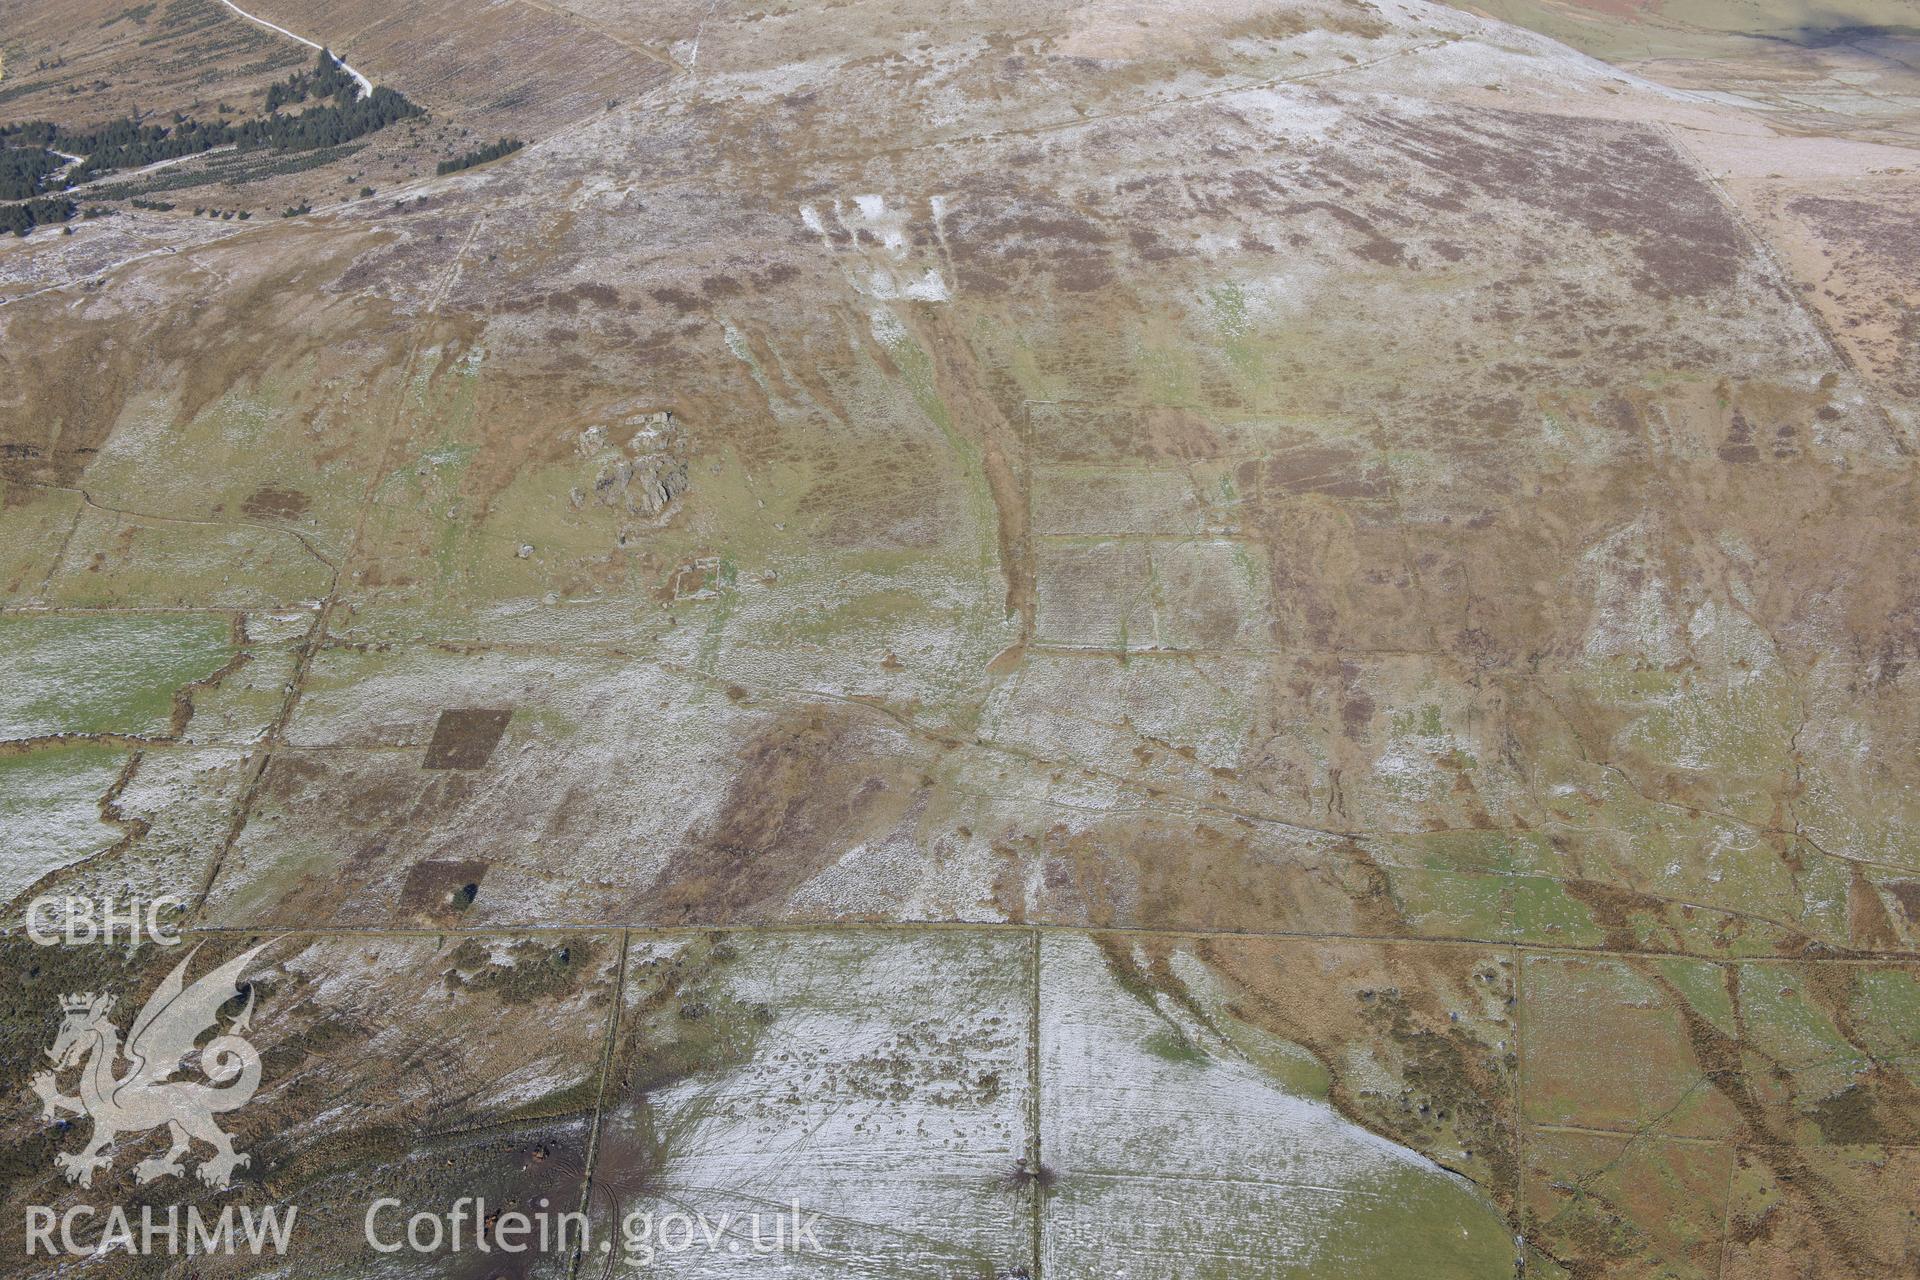 Carn Afr farmstead and settlement features, south east of Fishguard. Oblique aerial photograph taken during the Royal Commission's programme of archaeological aerial reconnaissance by Toby Driver on 4th February 2015.